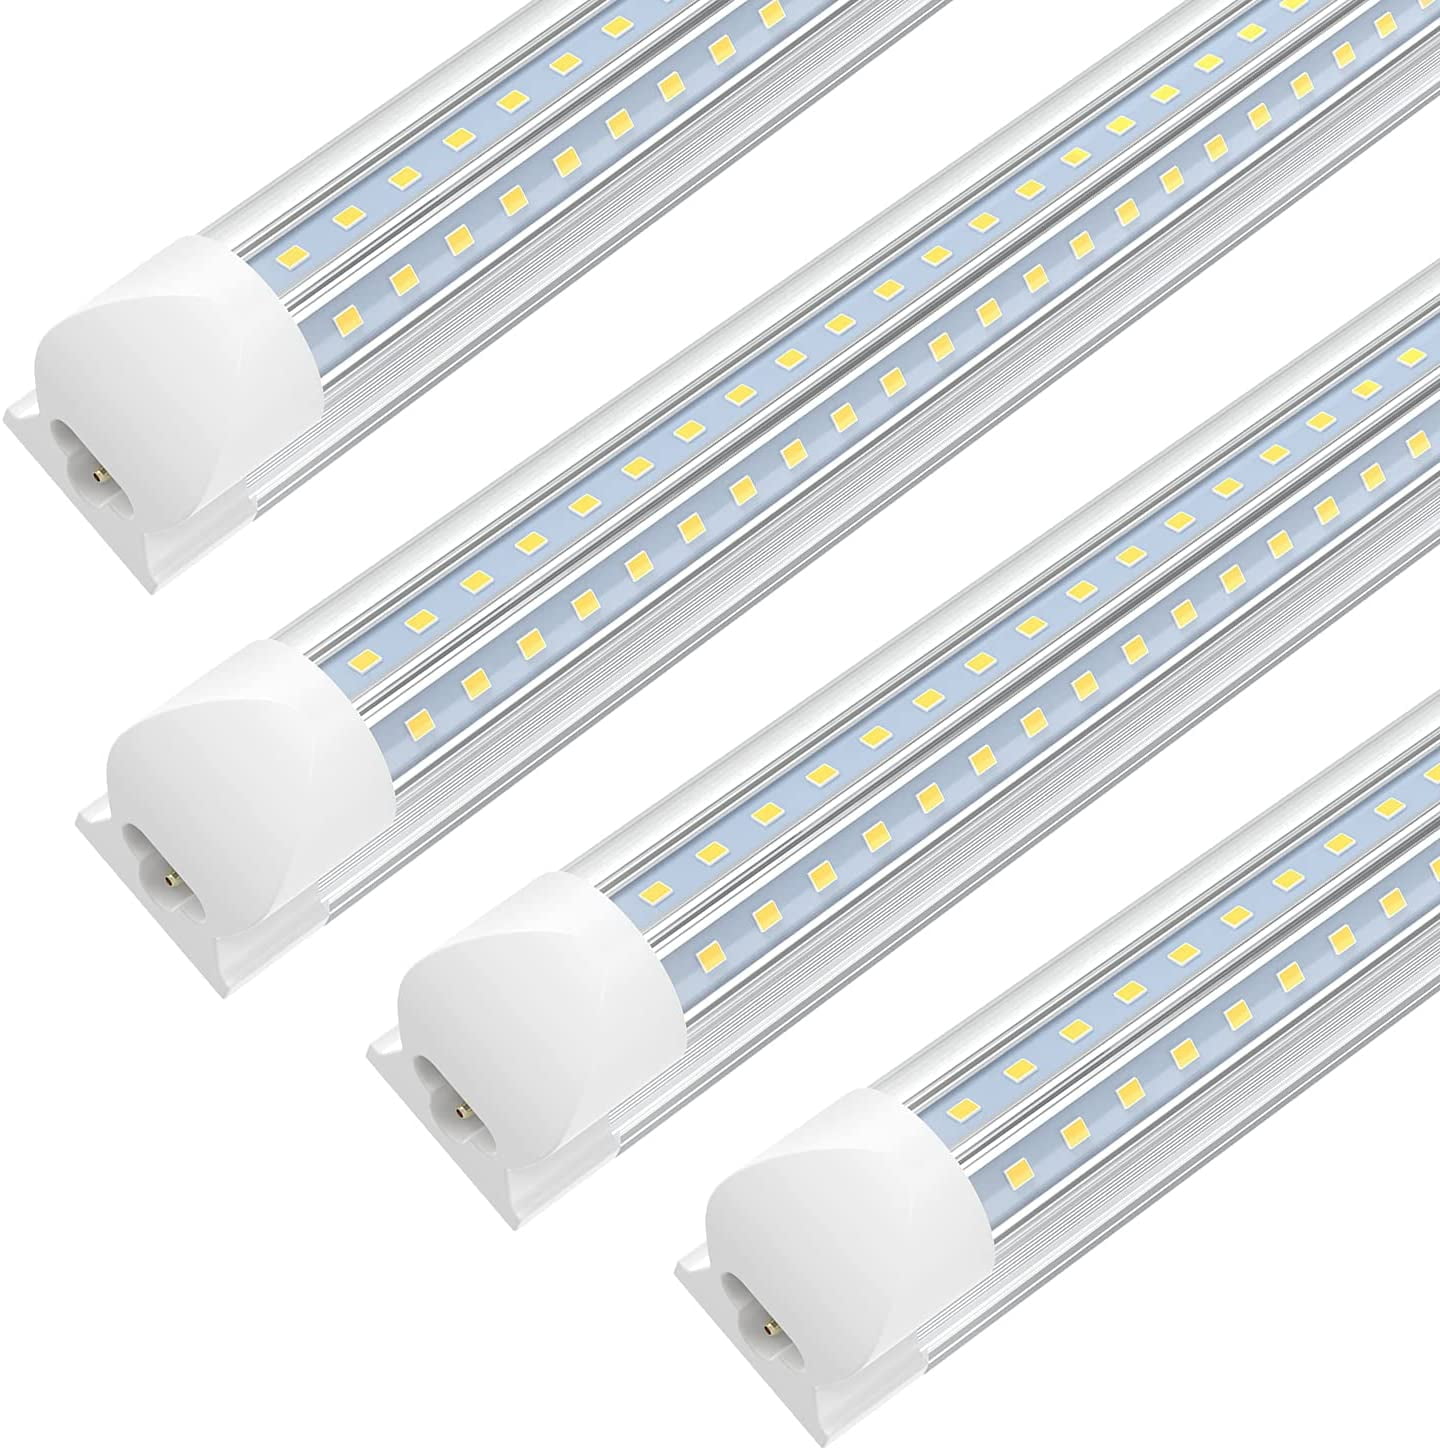 Details about   T8 LED Integrated Tube lights 6000k,4000k,3000k, ft 5,6 complete with fitting 